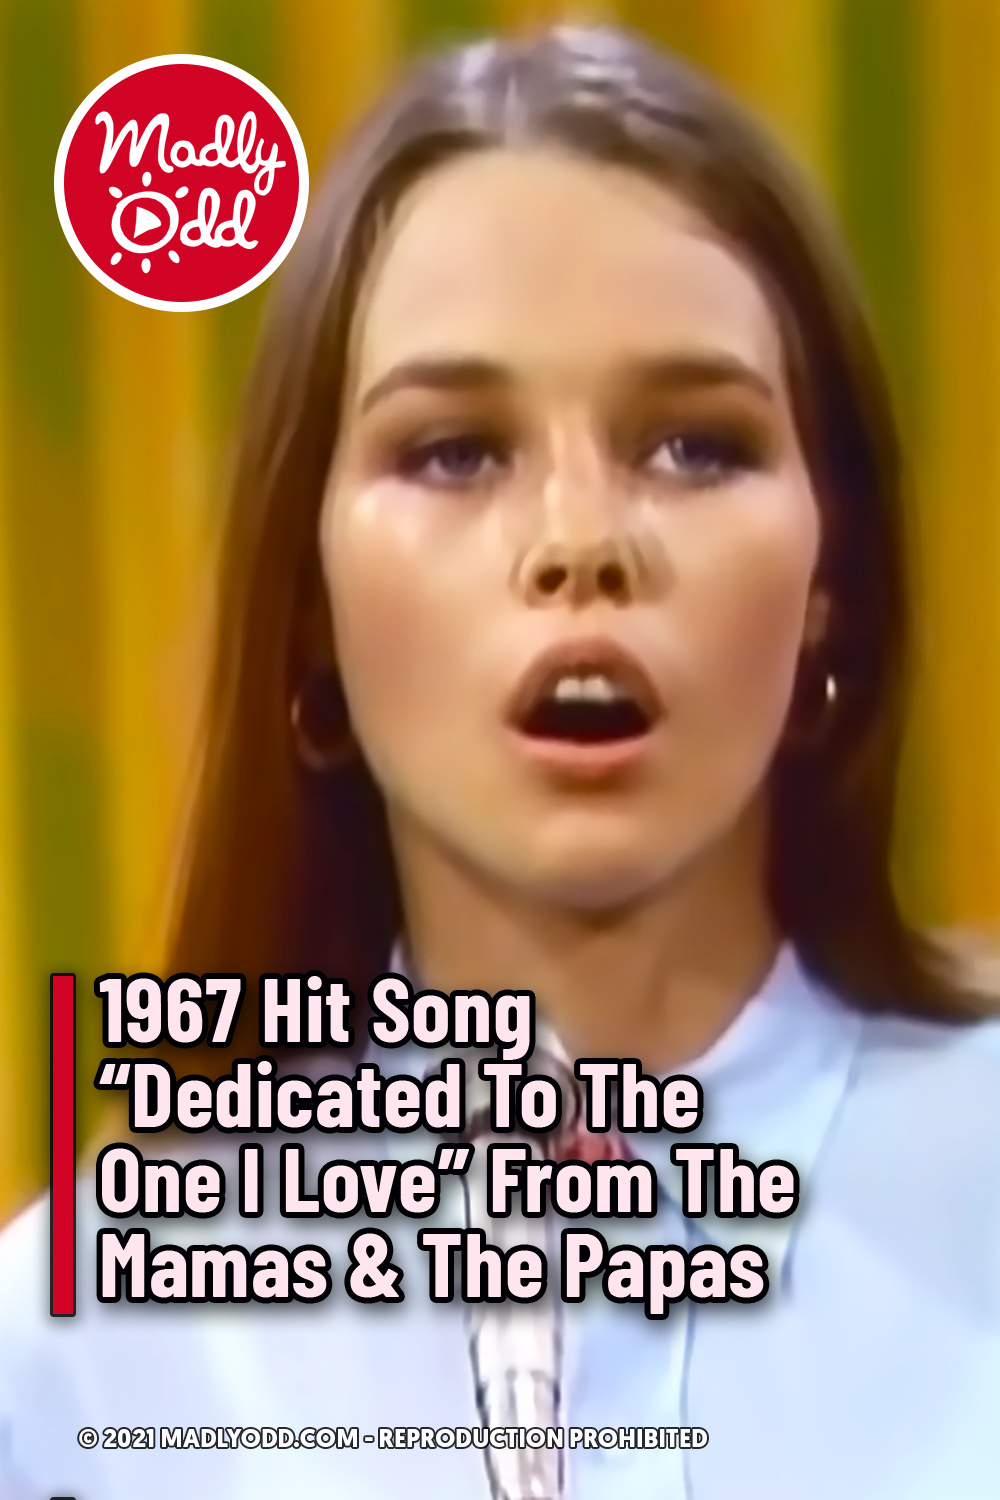 1967 Hit Song “Dedicated To The One I Love” From The Mamas & The Papas